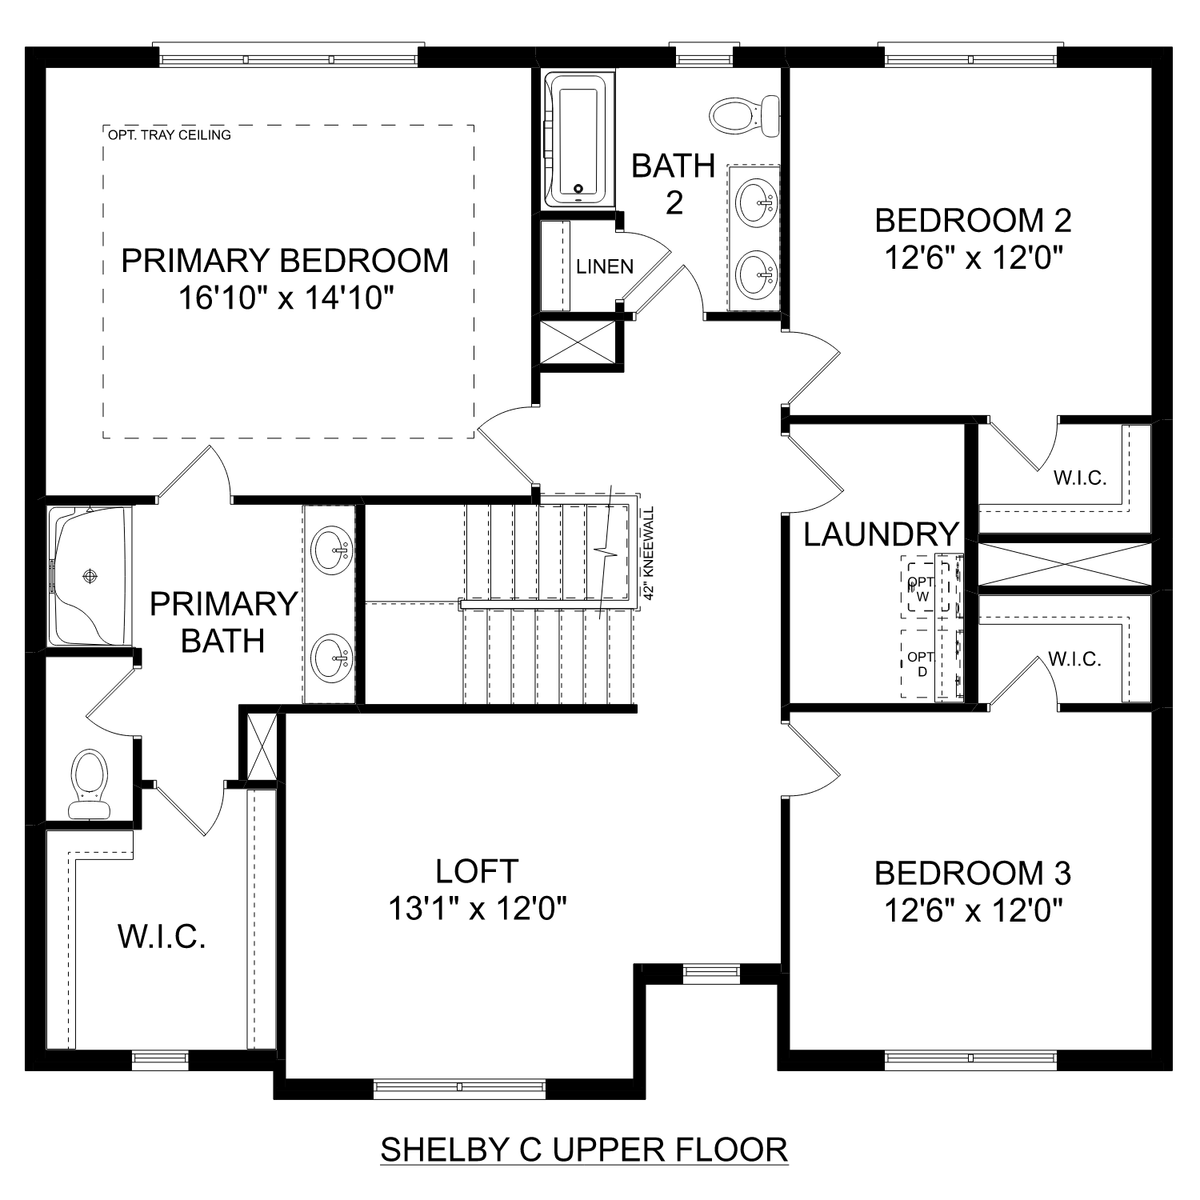 2 - The Shelby C buildable floor plan layout in Davidson Homes' Spragins Cove community.